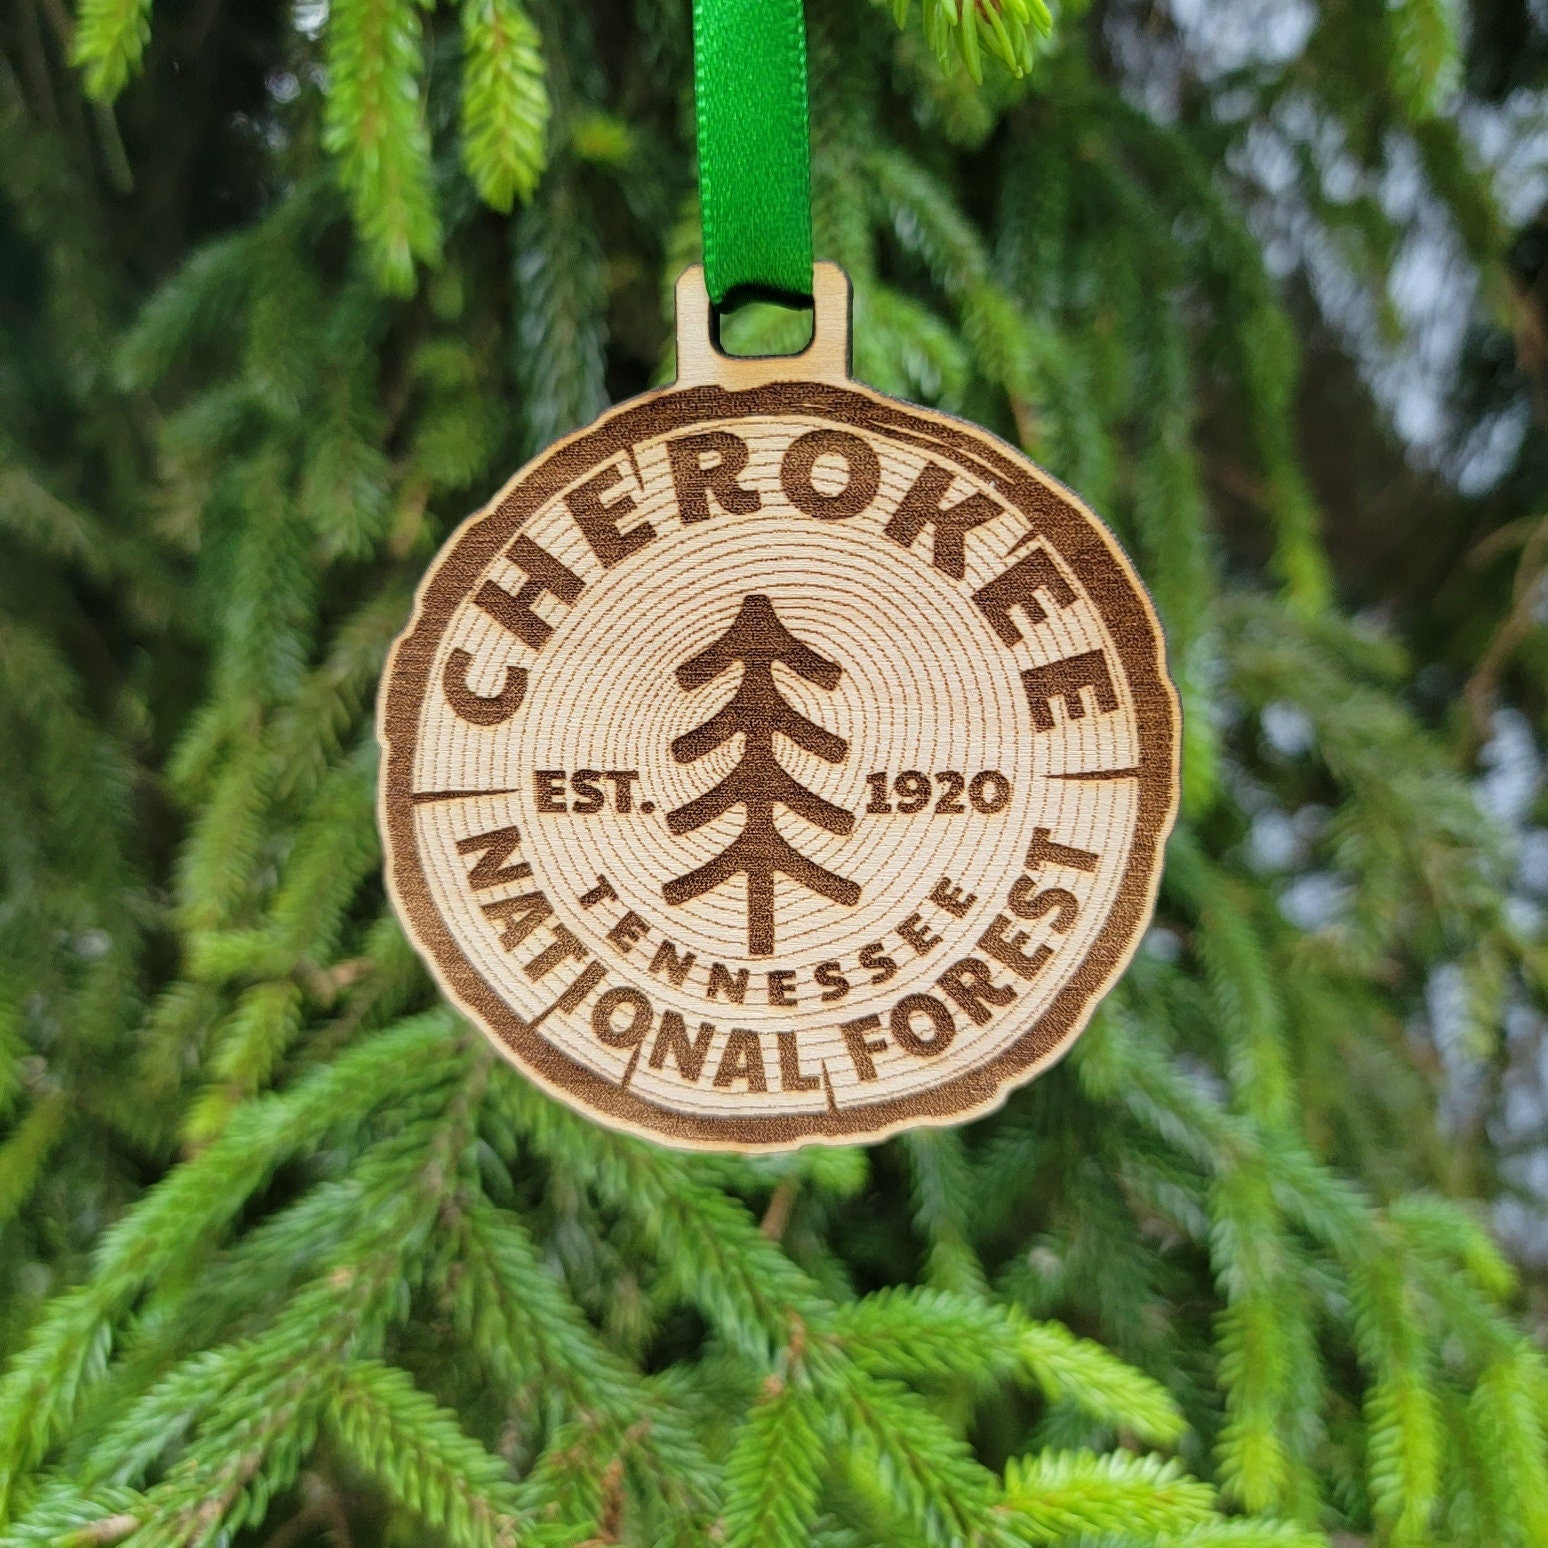 Cherokee National Forest Tennessee Ornament Christmas Wood Laser Cut Great Smoky Mountains National Park